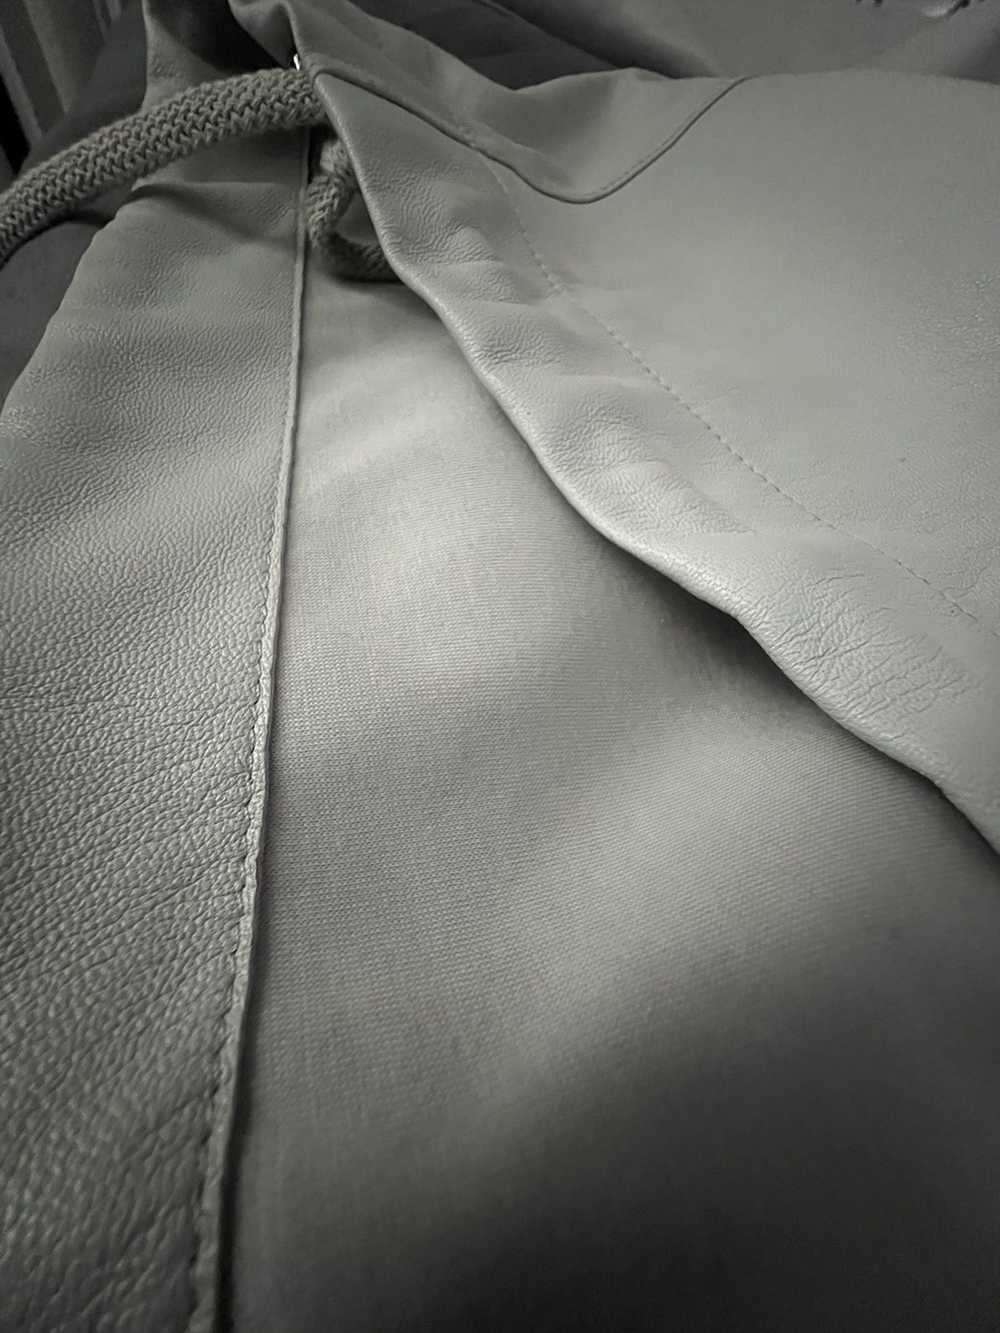 Givenchy Givenchy Grey Lamb Leather Hoodie - image 8